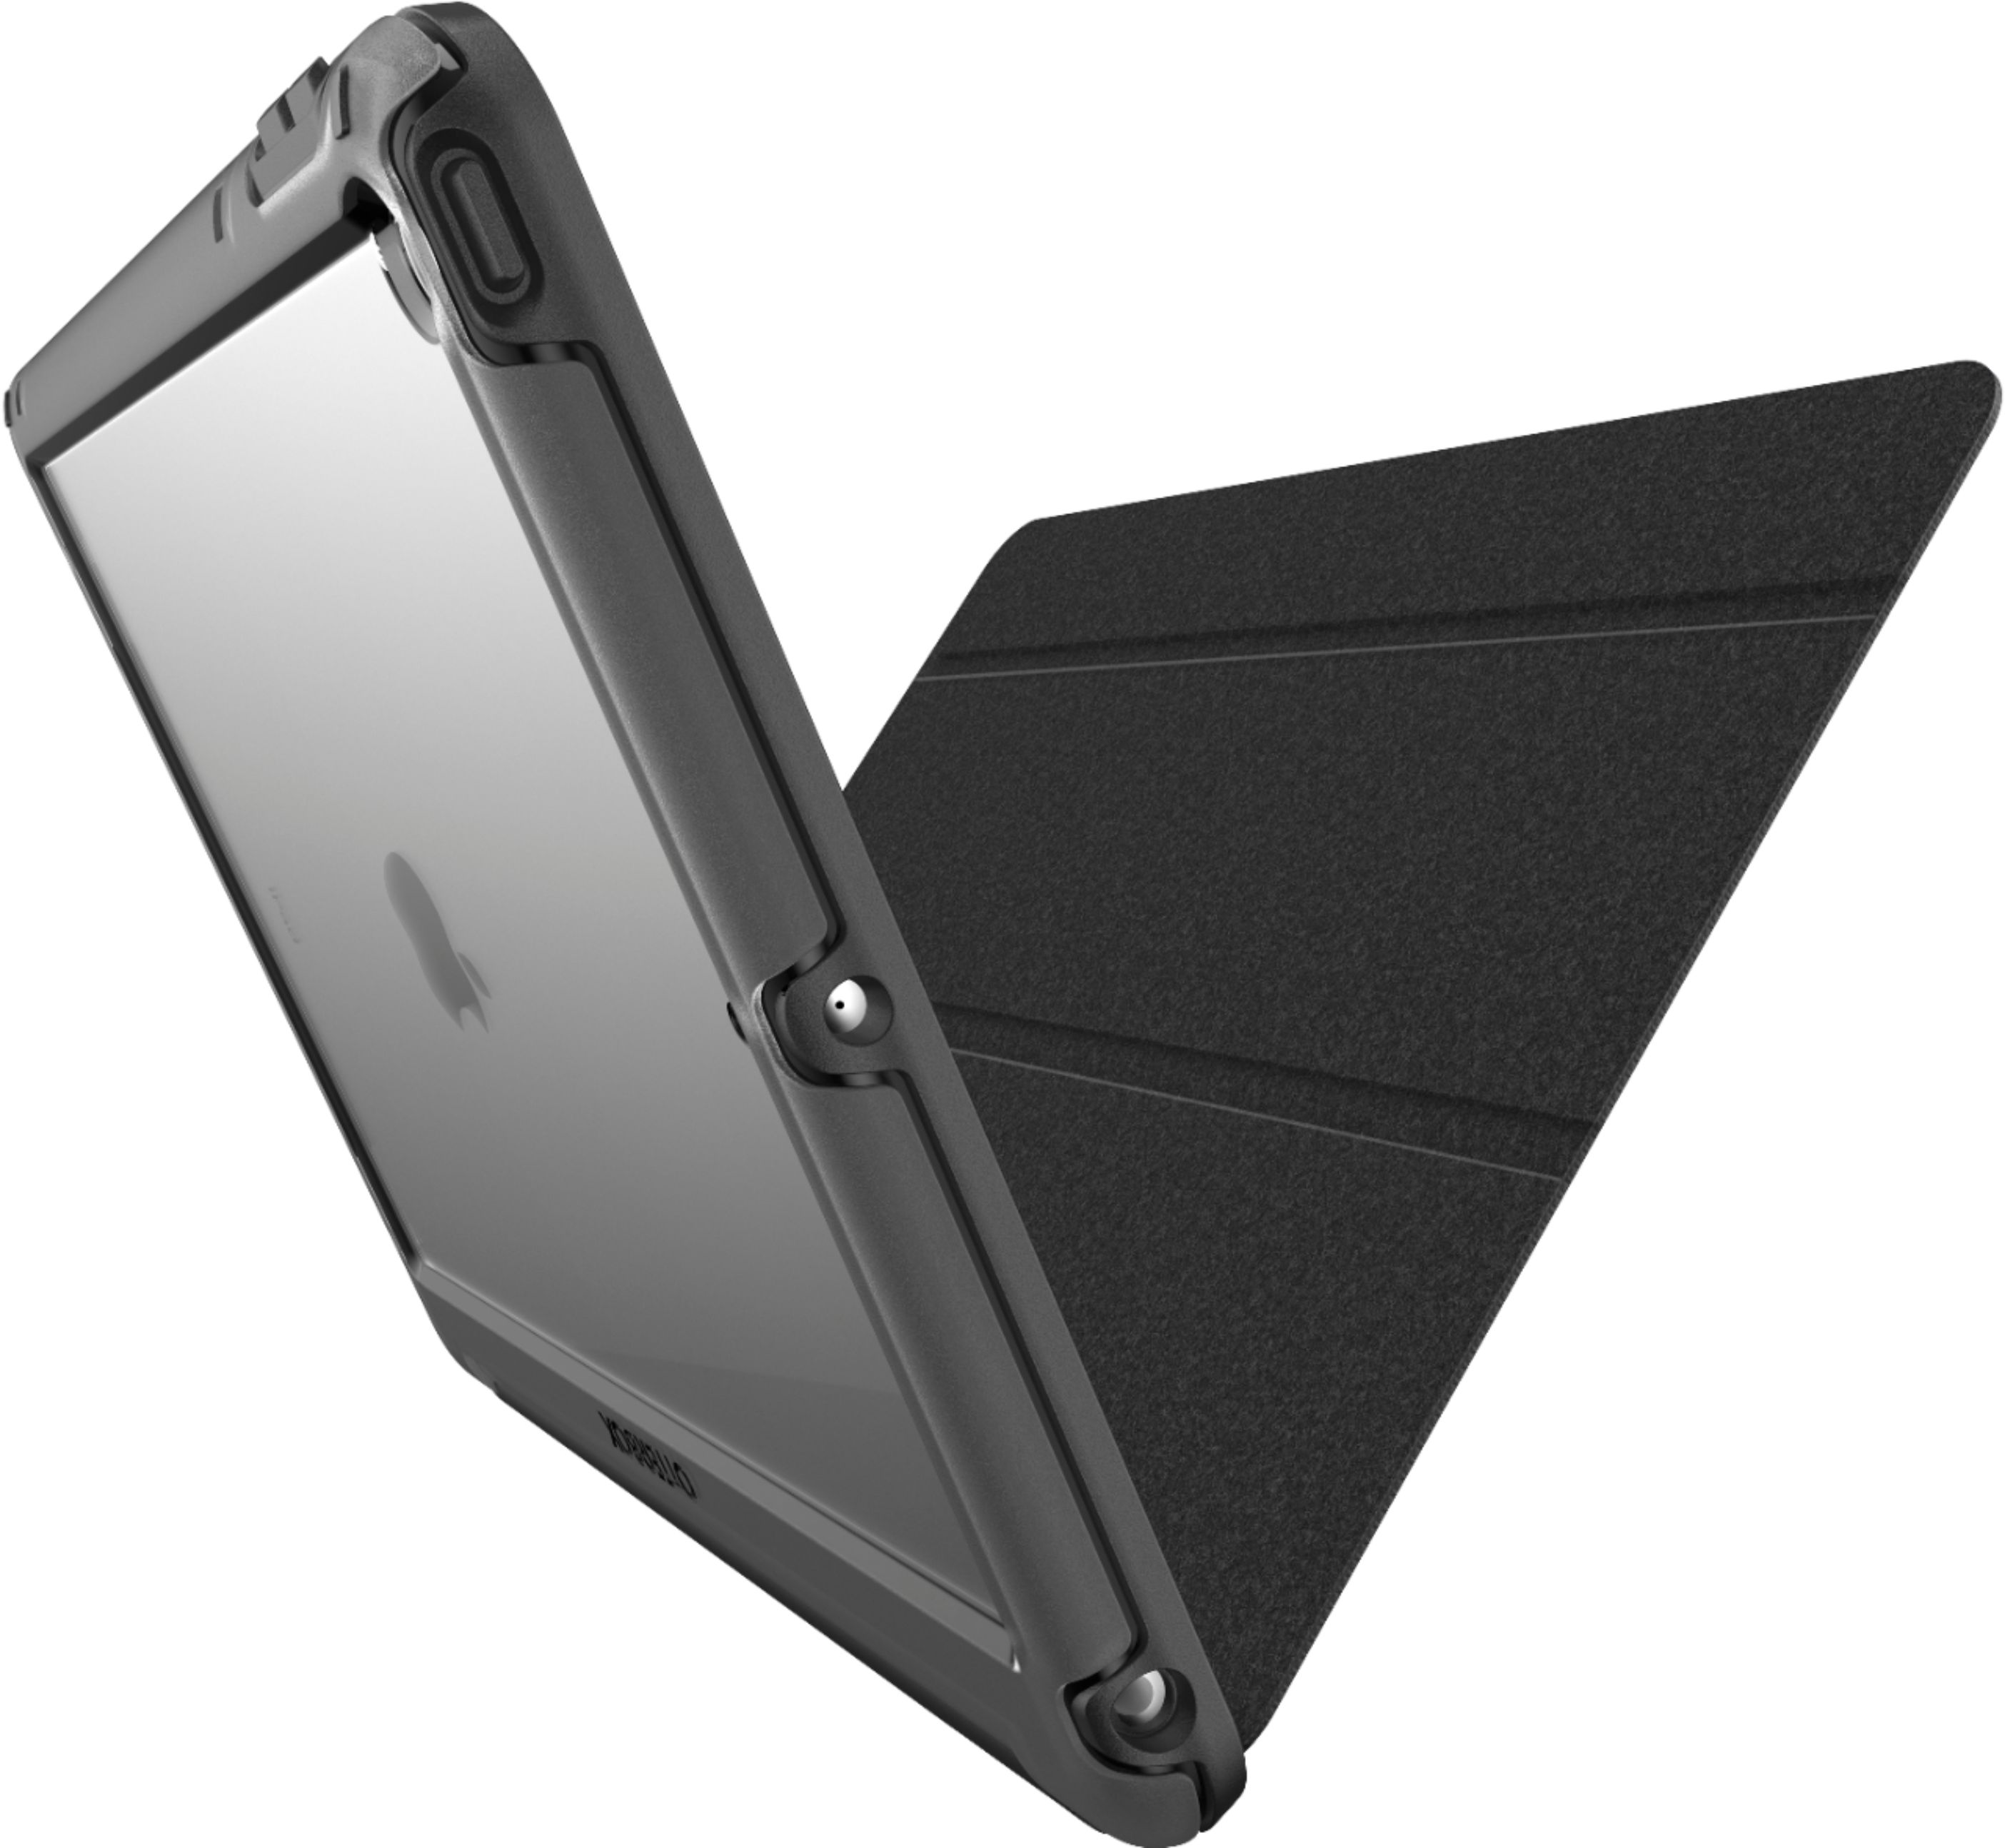 Buy OtterBox Symmetry Series Case for iPad (9th generation) - Apple